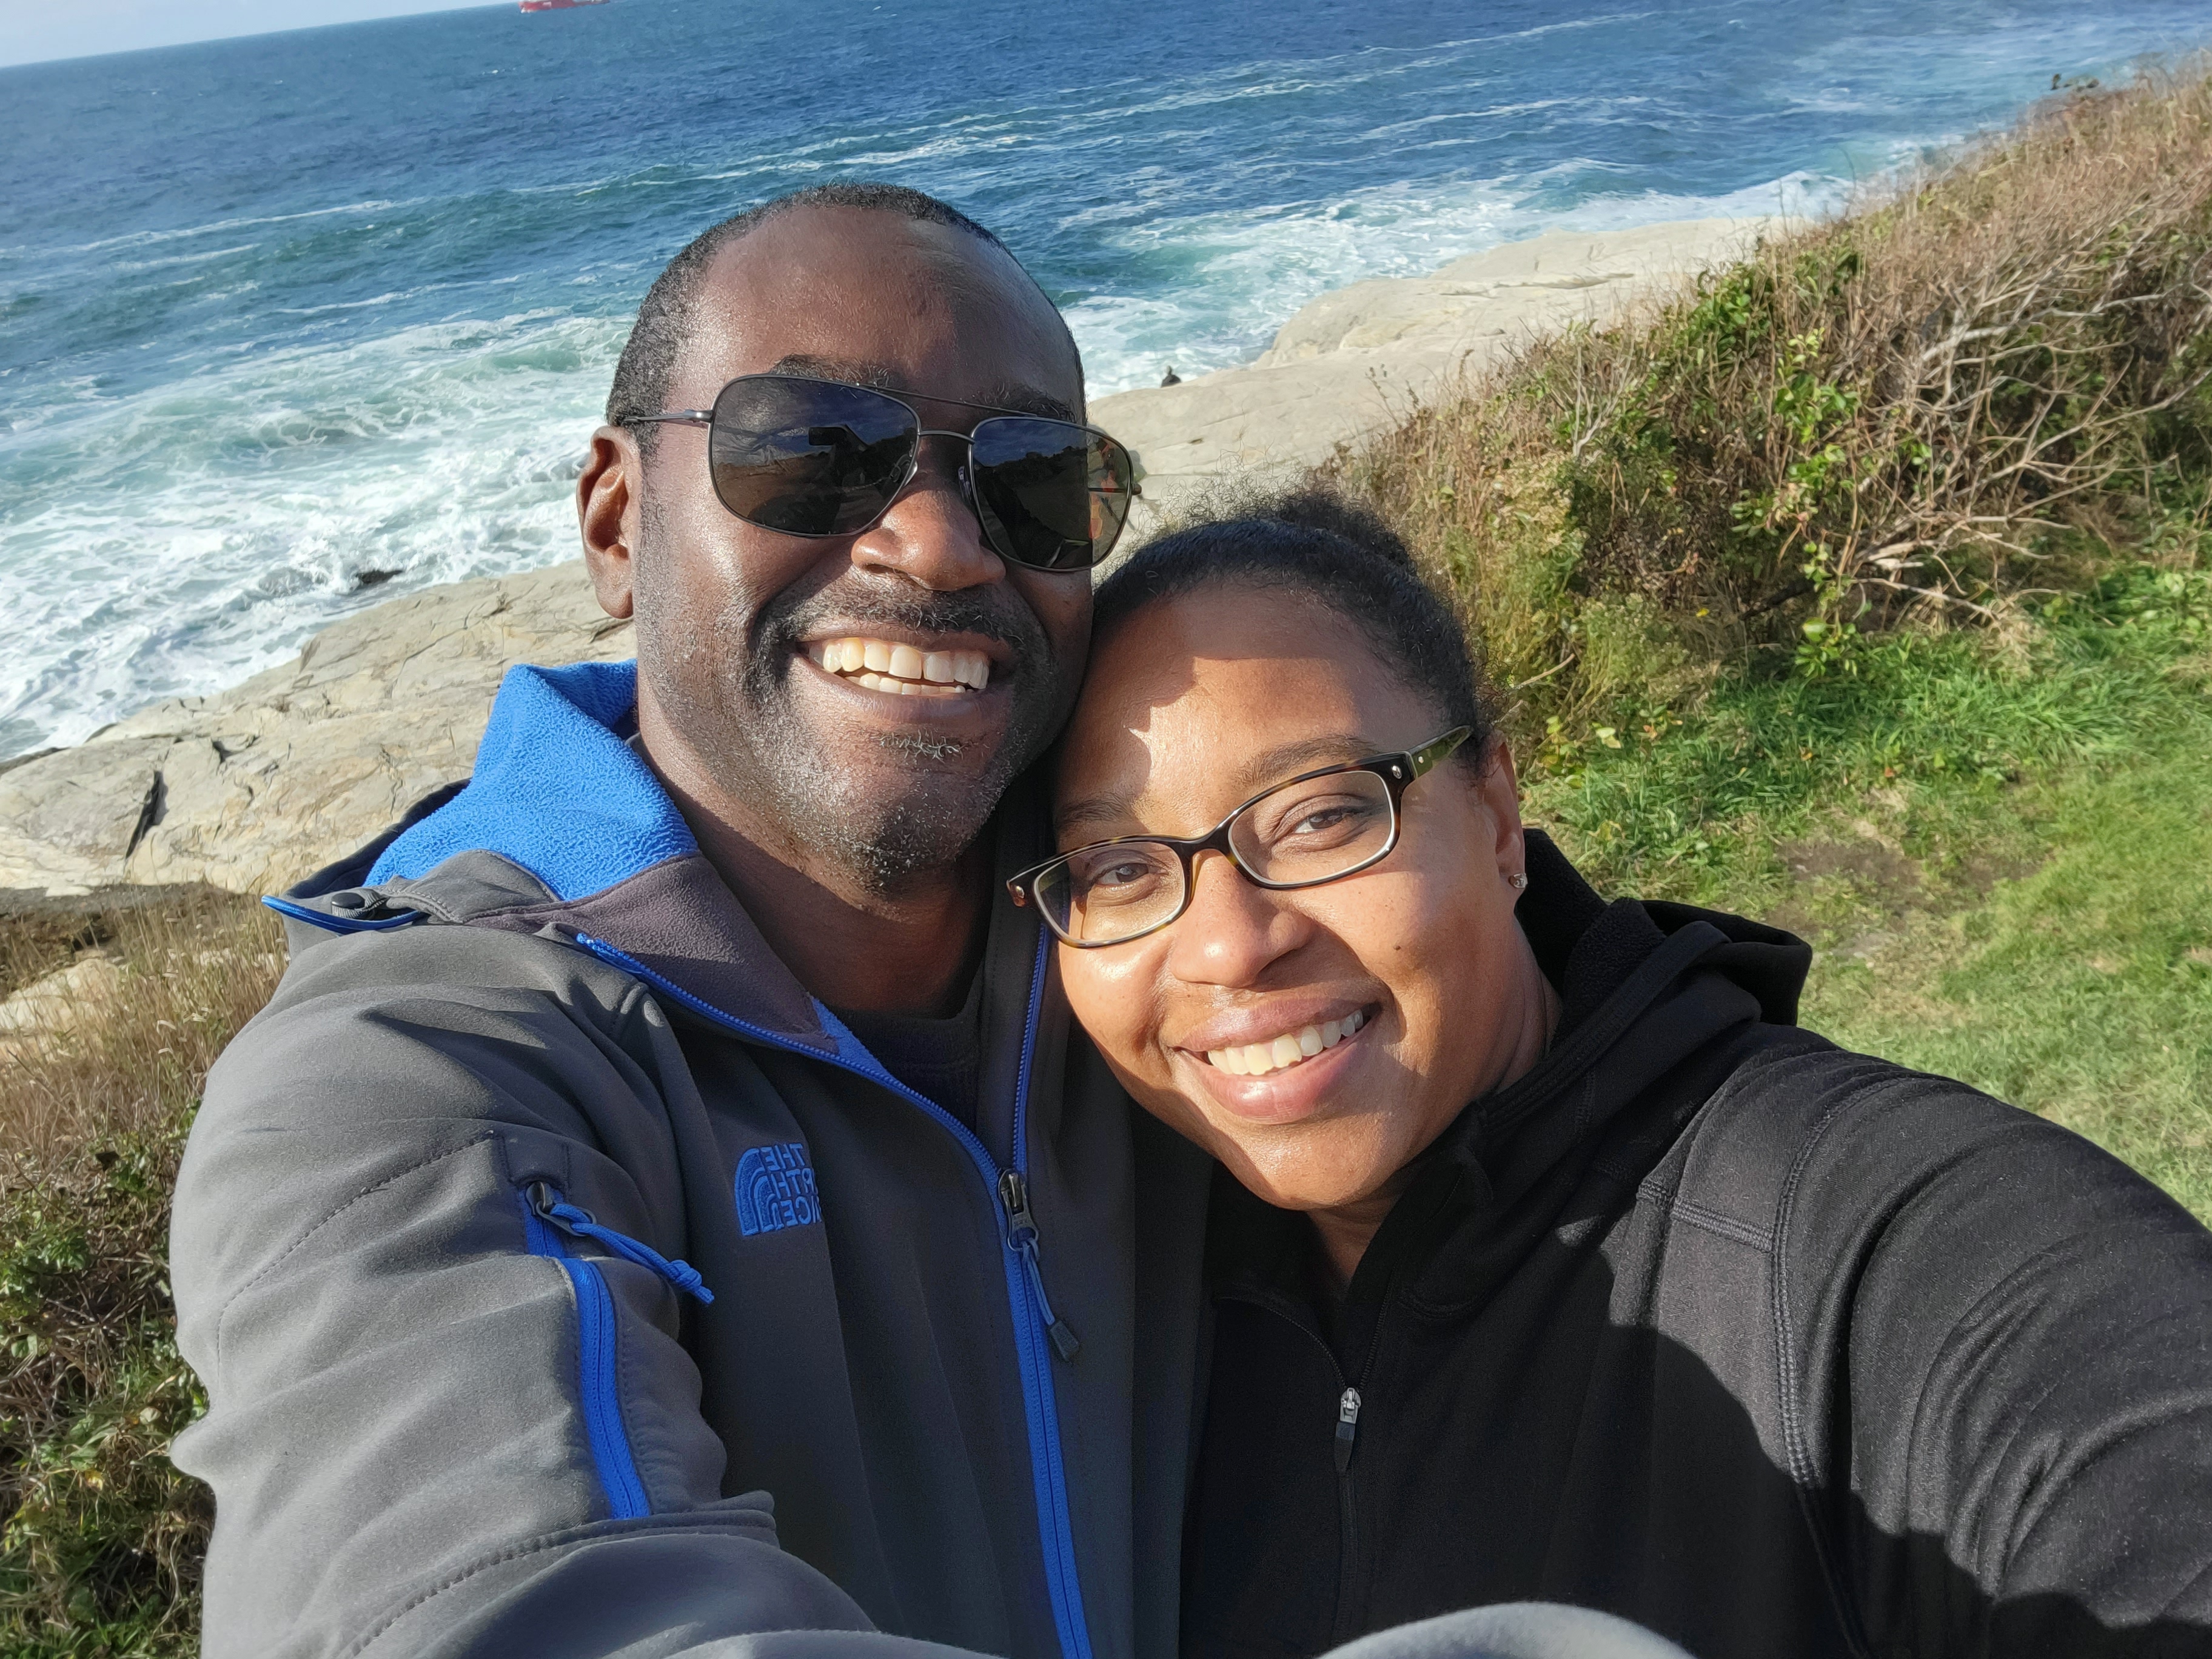 Leonie Roberts with her husband outside near the ocean.